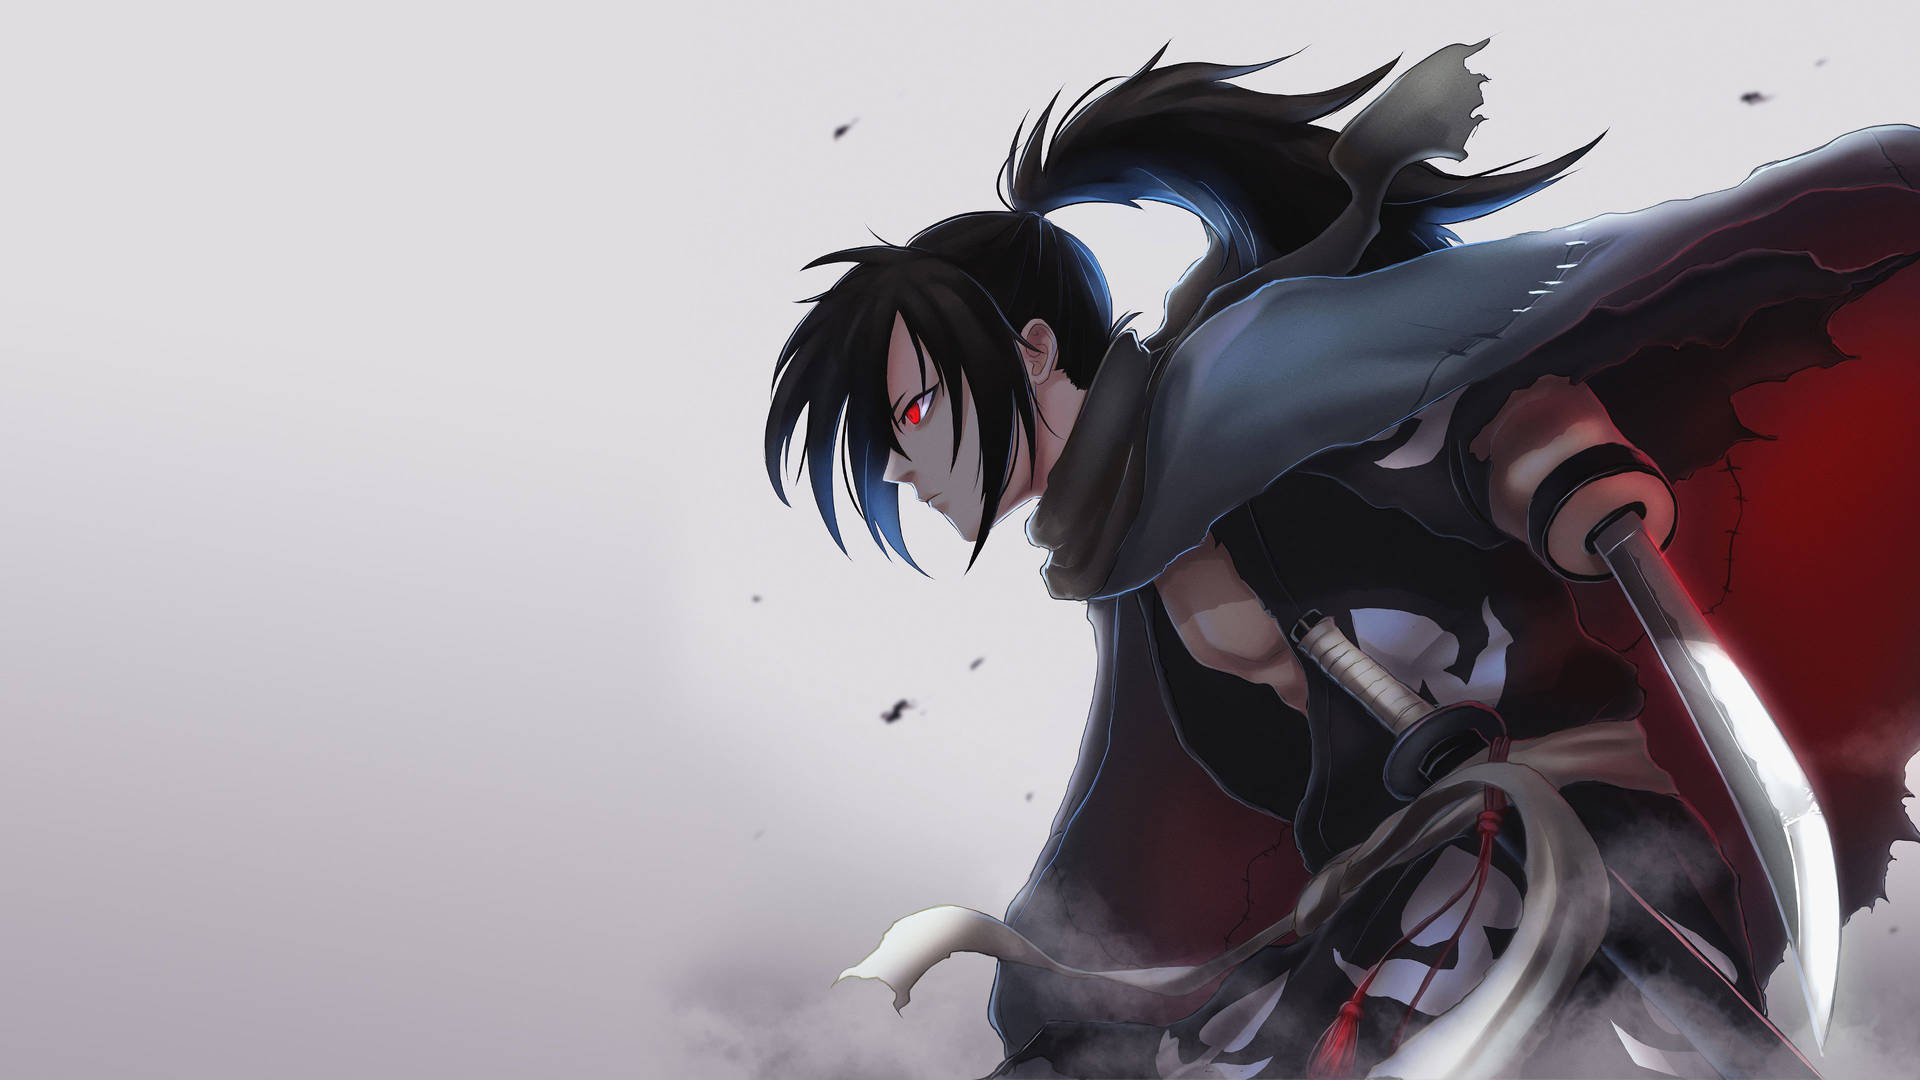 Fearless Hyakkimaru Sets Out To Protect The World From Evil In Dororo Background